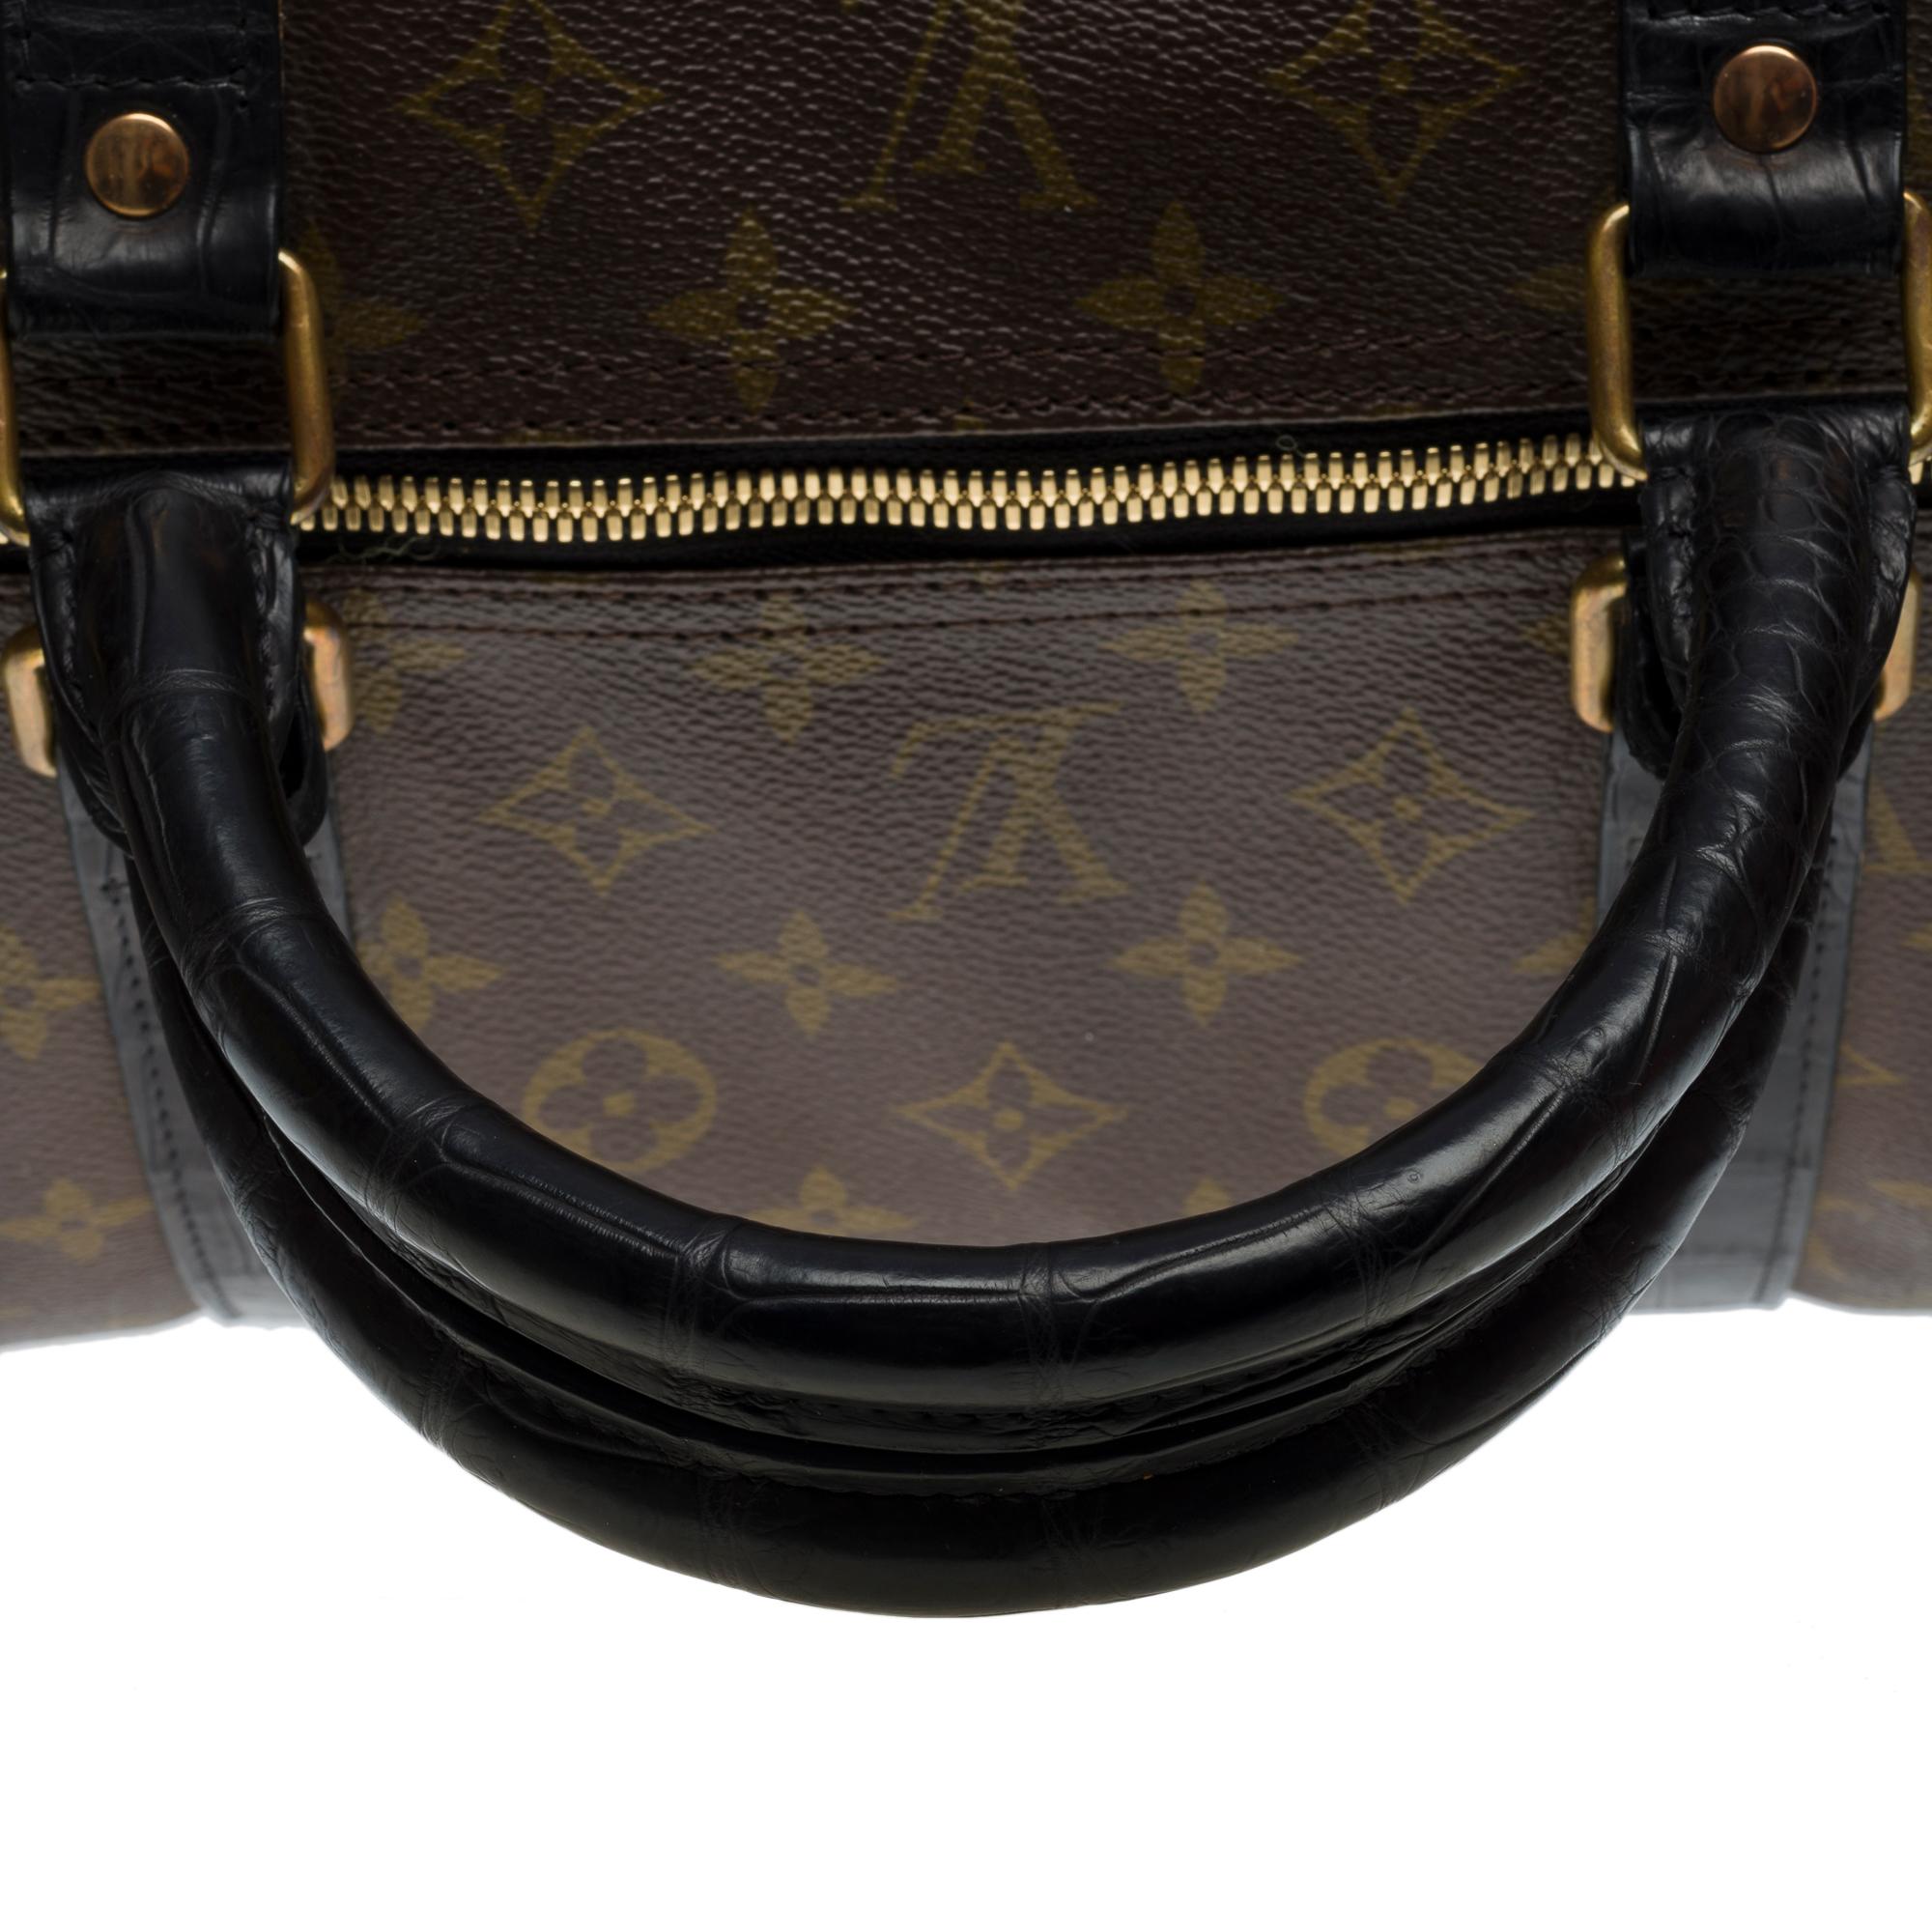 Customized Louis Vuitton Keepall 60 strap Travel bag with Black Crocodile For Sale 4